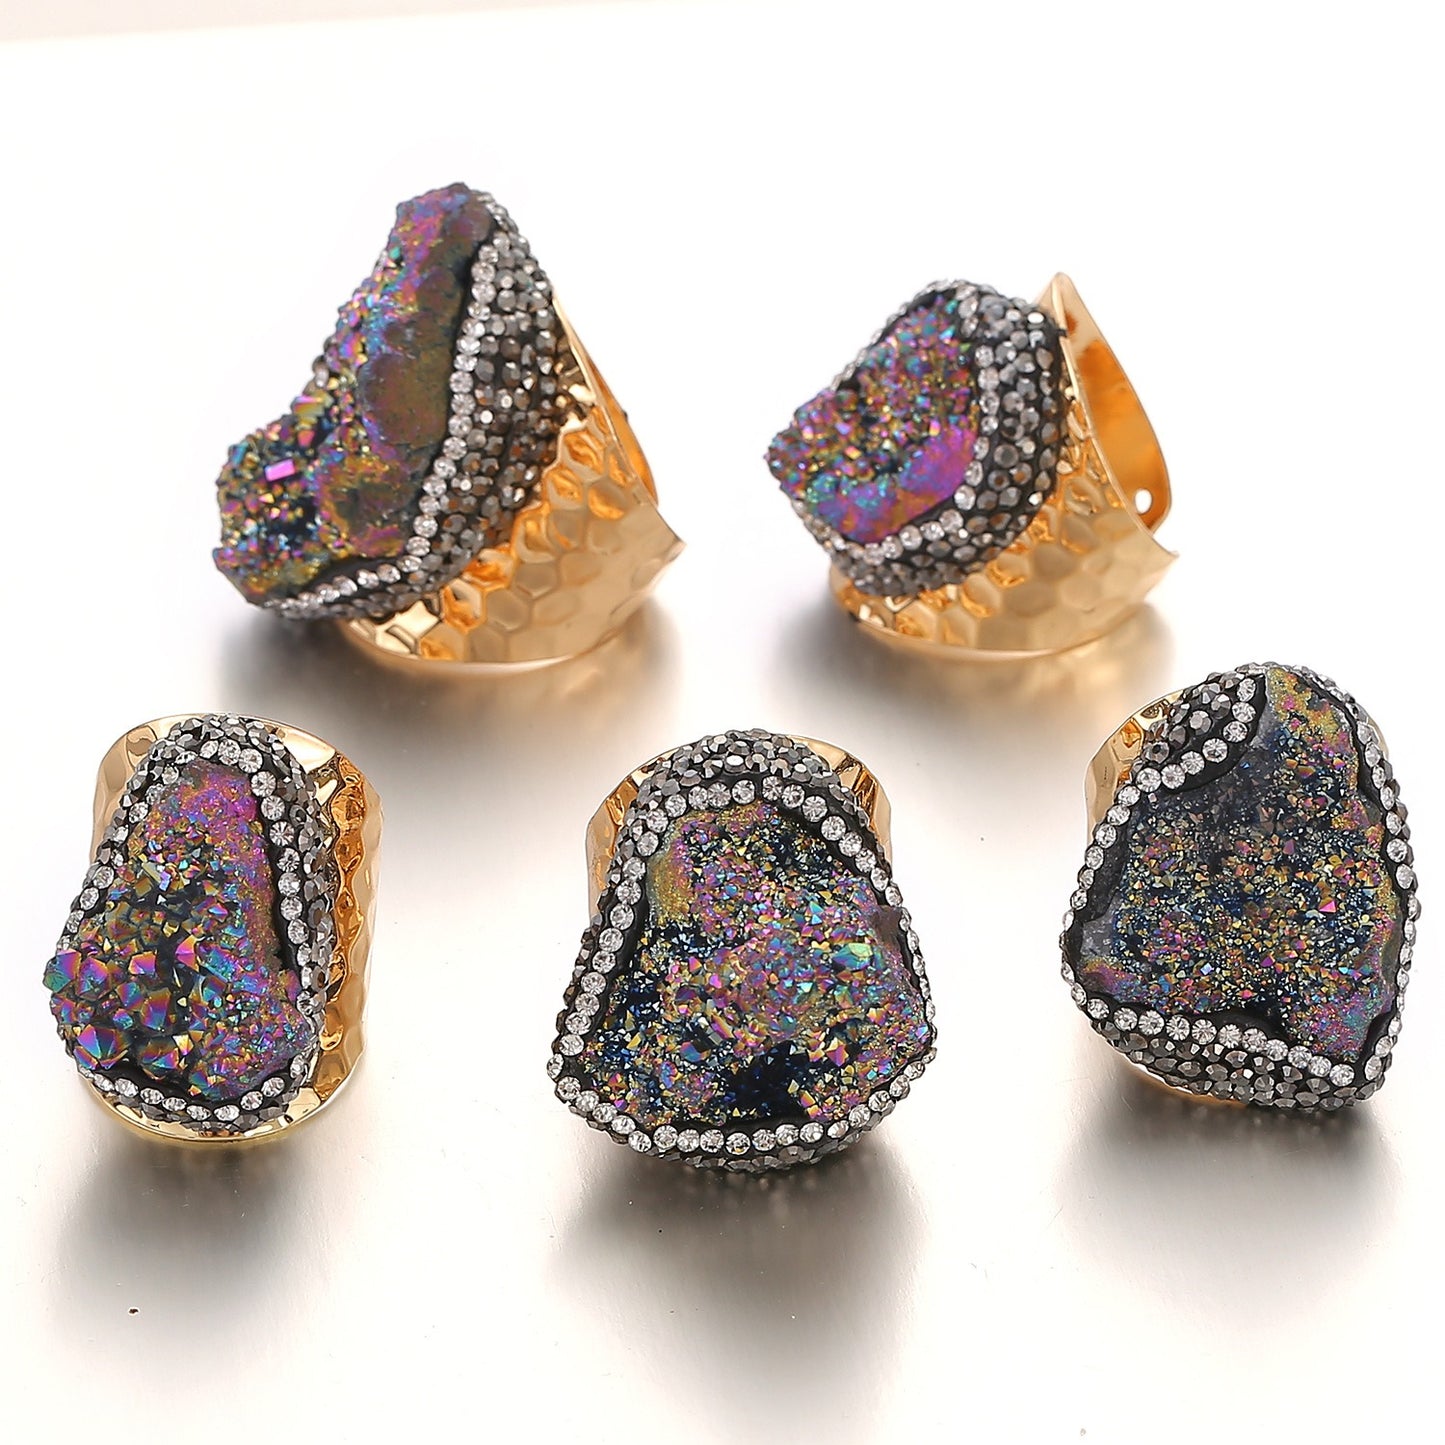 Irregular natural crystal cluster ring, original stone crystal set with diamonds, natural stone gold-plated handmade jewelry